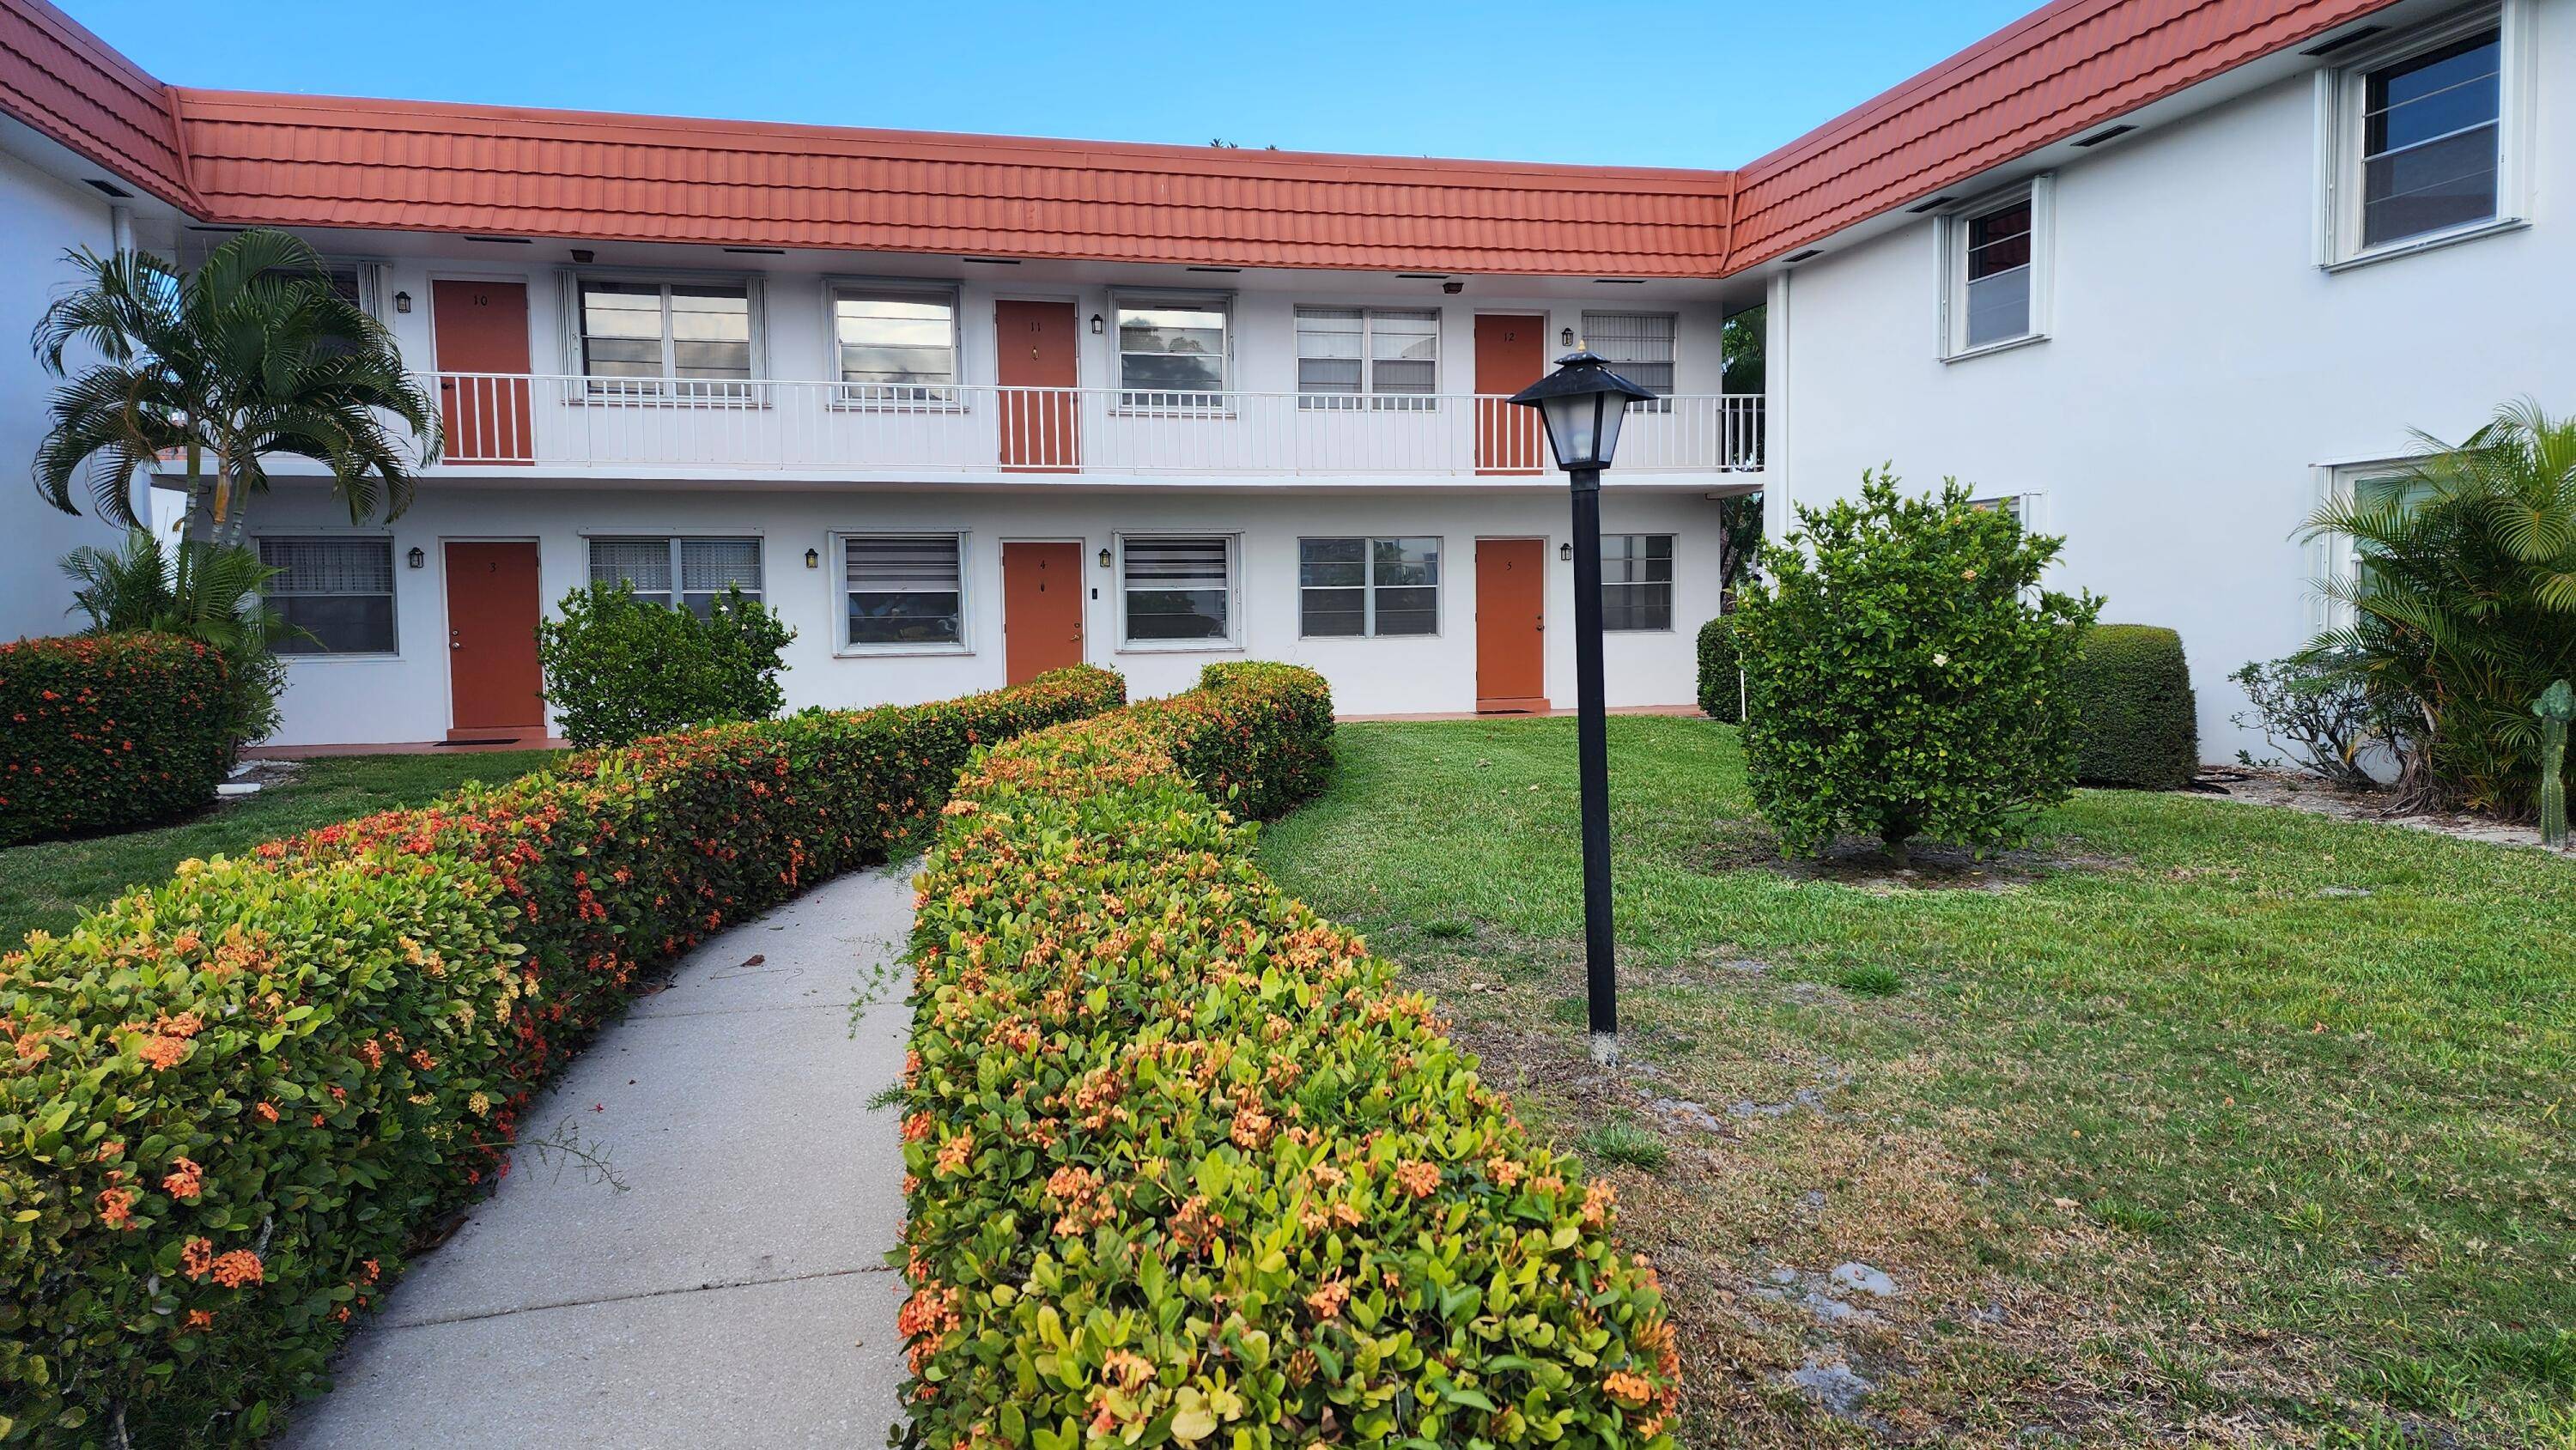 Location, Location, Just minutes to the beach and fabulous downtown Stuart.